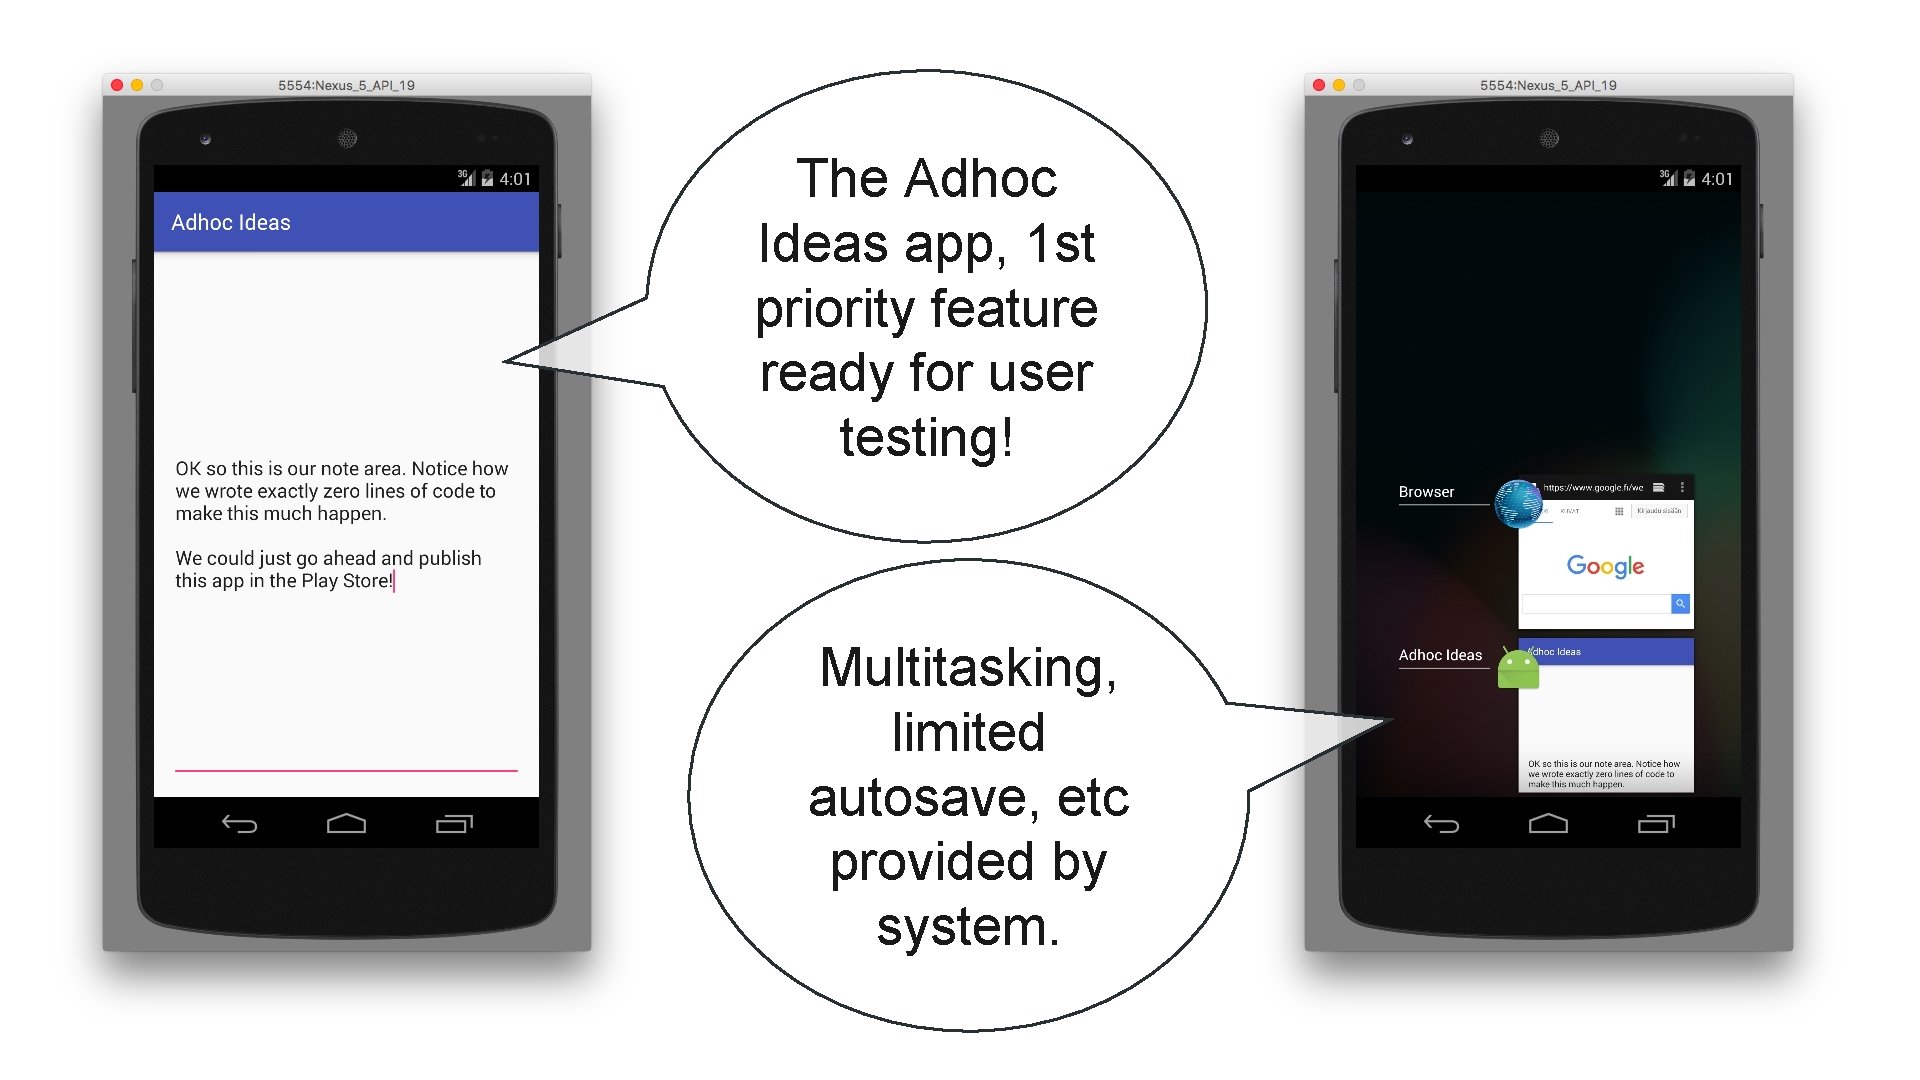 The Adhoc Ideas app, 1 st priority feature ready for user testing! Multitasking, limited